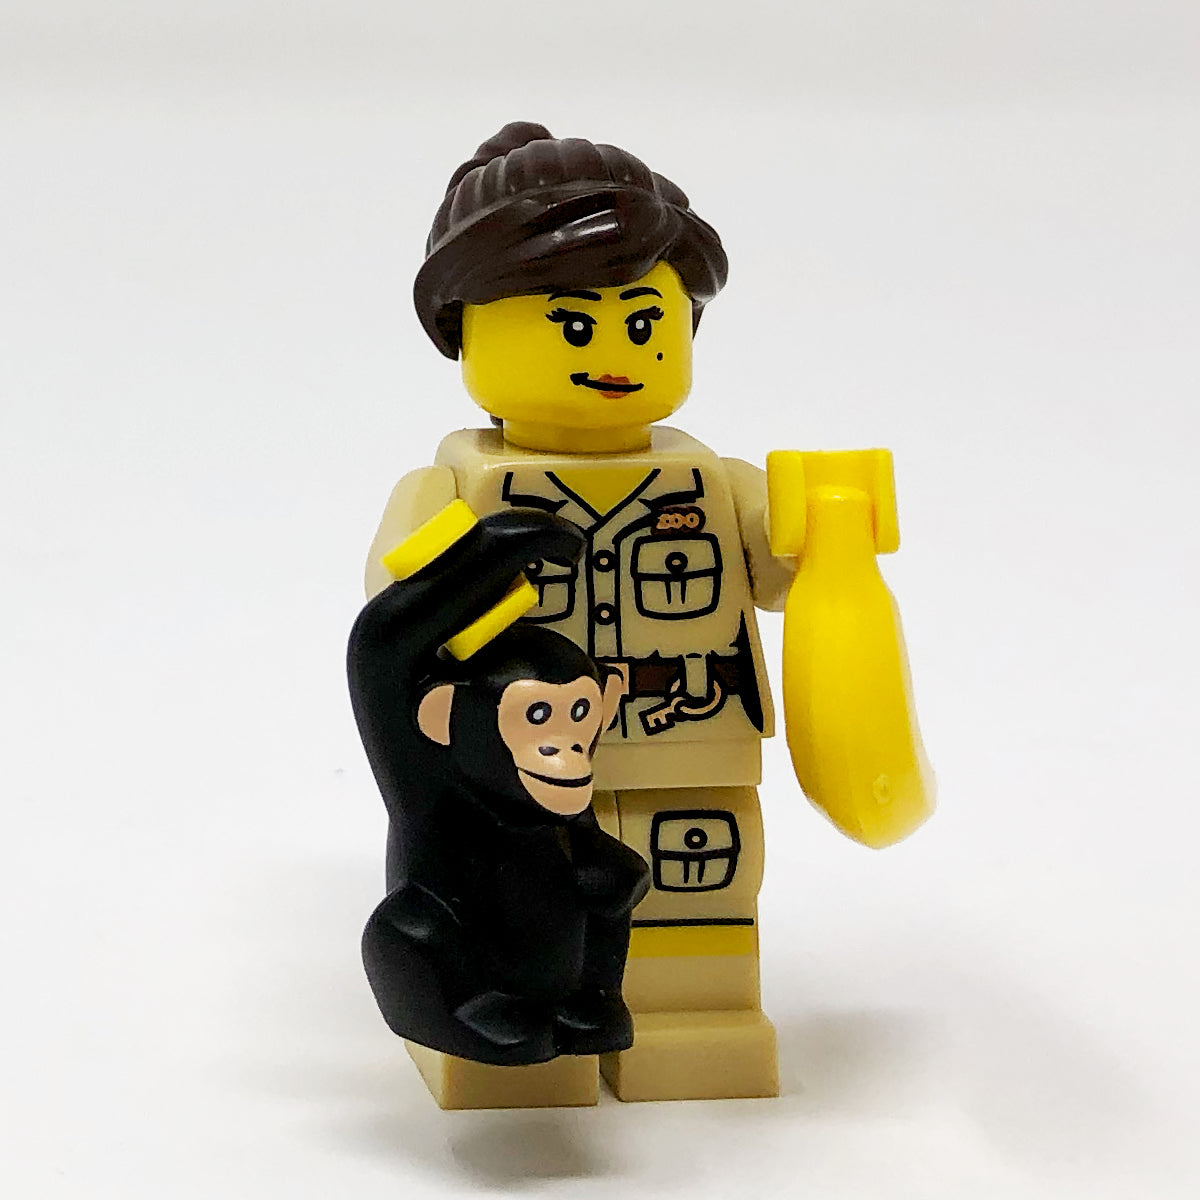 S5 Zookeeper - Series 5 Minifigure (col071)